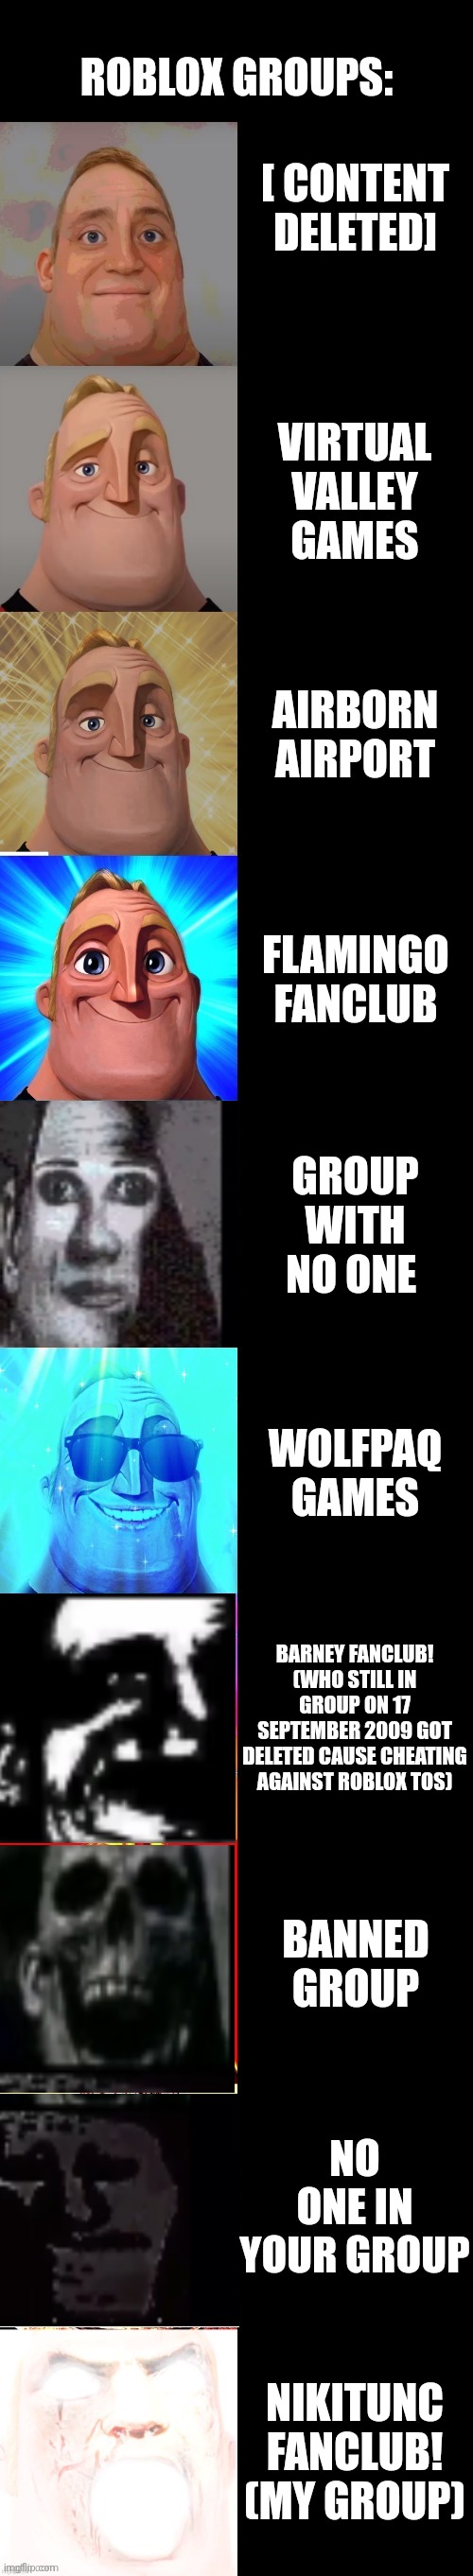 mr incredible becoming canny | ROBLOX GROUPS:; [ CONTENT DELETED]; VIRTUAL VALLEY GAMES; AIRBORN AIRPORT; FLAMINGO FANCLUB; GROUP WITH NO ONE; WOLFPAQ GAMES; BARNEY FANCLUB! (WHO STILL IN GROUP ON 17 SEPTEMBER 2009 GOT DELETED CAUSE CHEATING AGAINST ROBLOX TOS); BANNED GROUP; NO ONE IN YOUR GROUP; NIKITUNC FANCLUB! (MY GROUP) | image tagged in mr incredible becoming canny | made w/ Imgflip meme maker